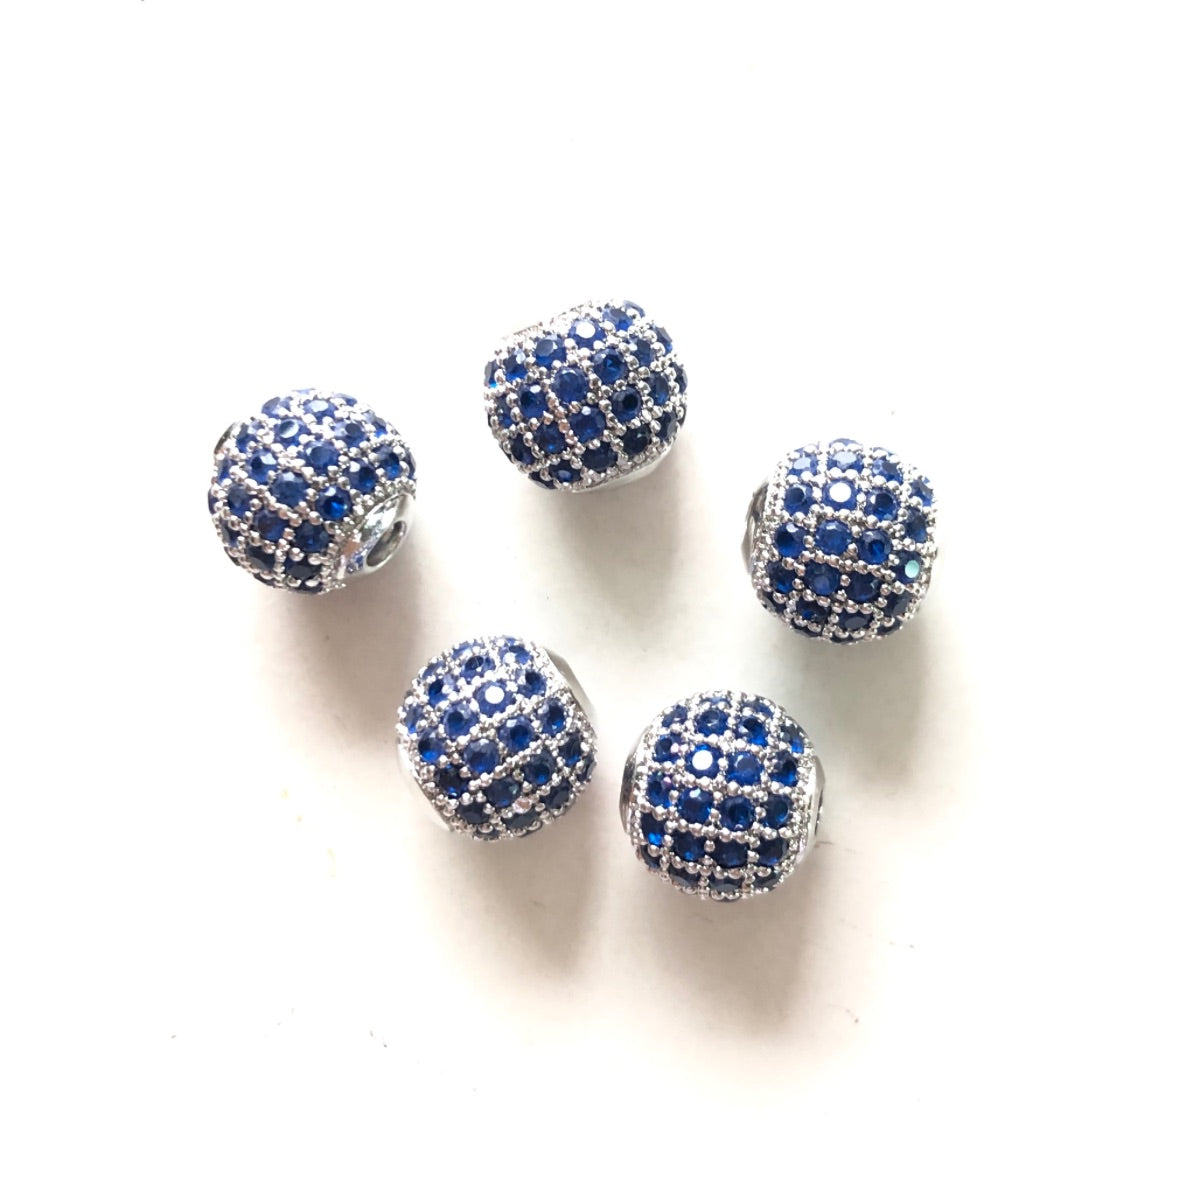 10pcs/lot 6mm, 8mm Colorful CZ Paved Ball Spacers Silver Blue CZ Paved Spacers 6mm Beads 8mm Beads Ball Beads Colorful Zirconia New Spacers Arrivals Charms Beads Beyond